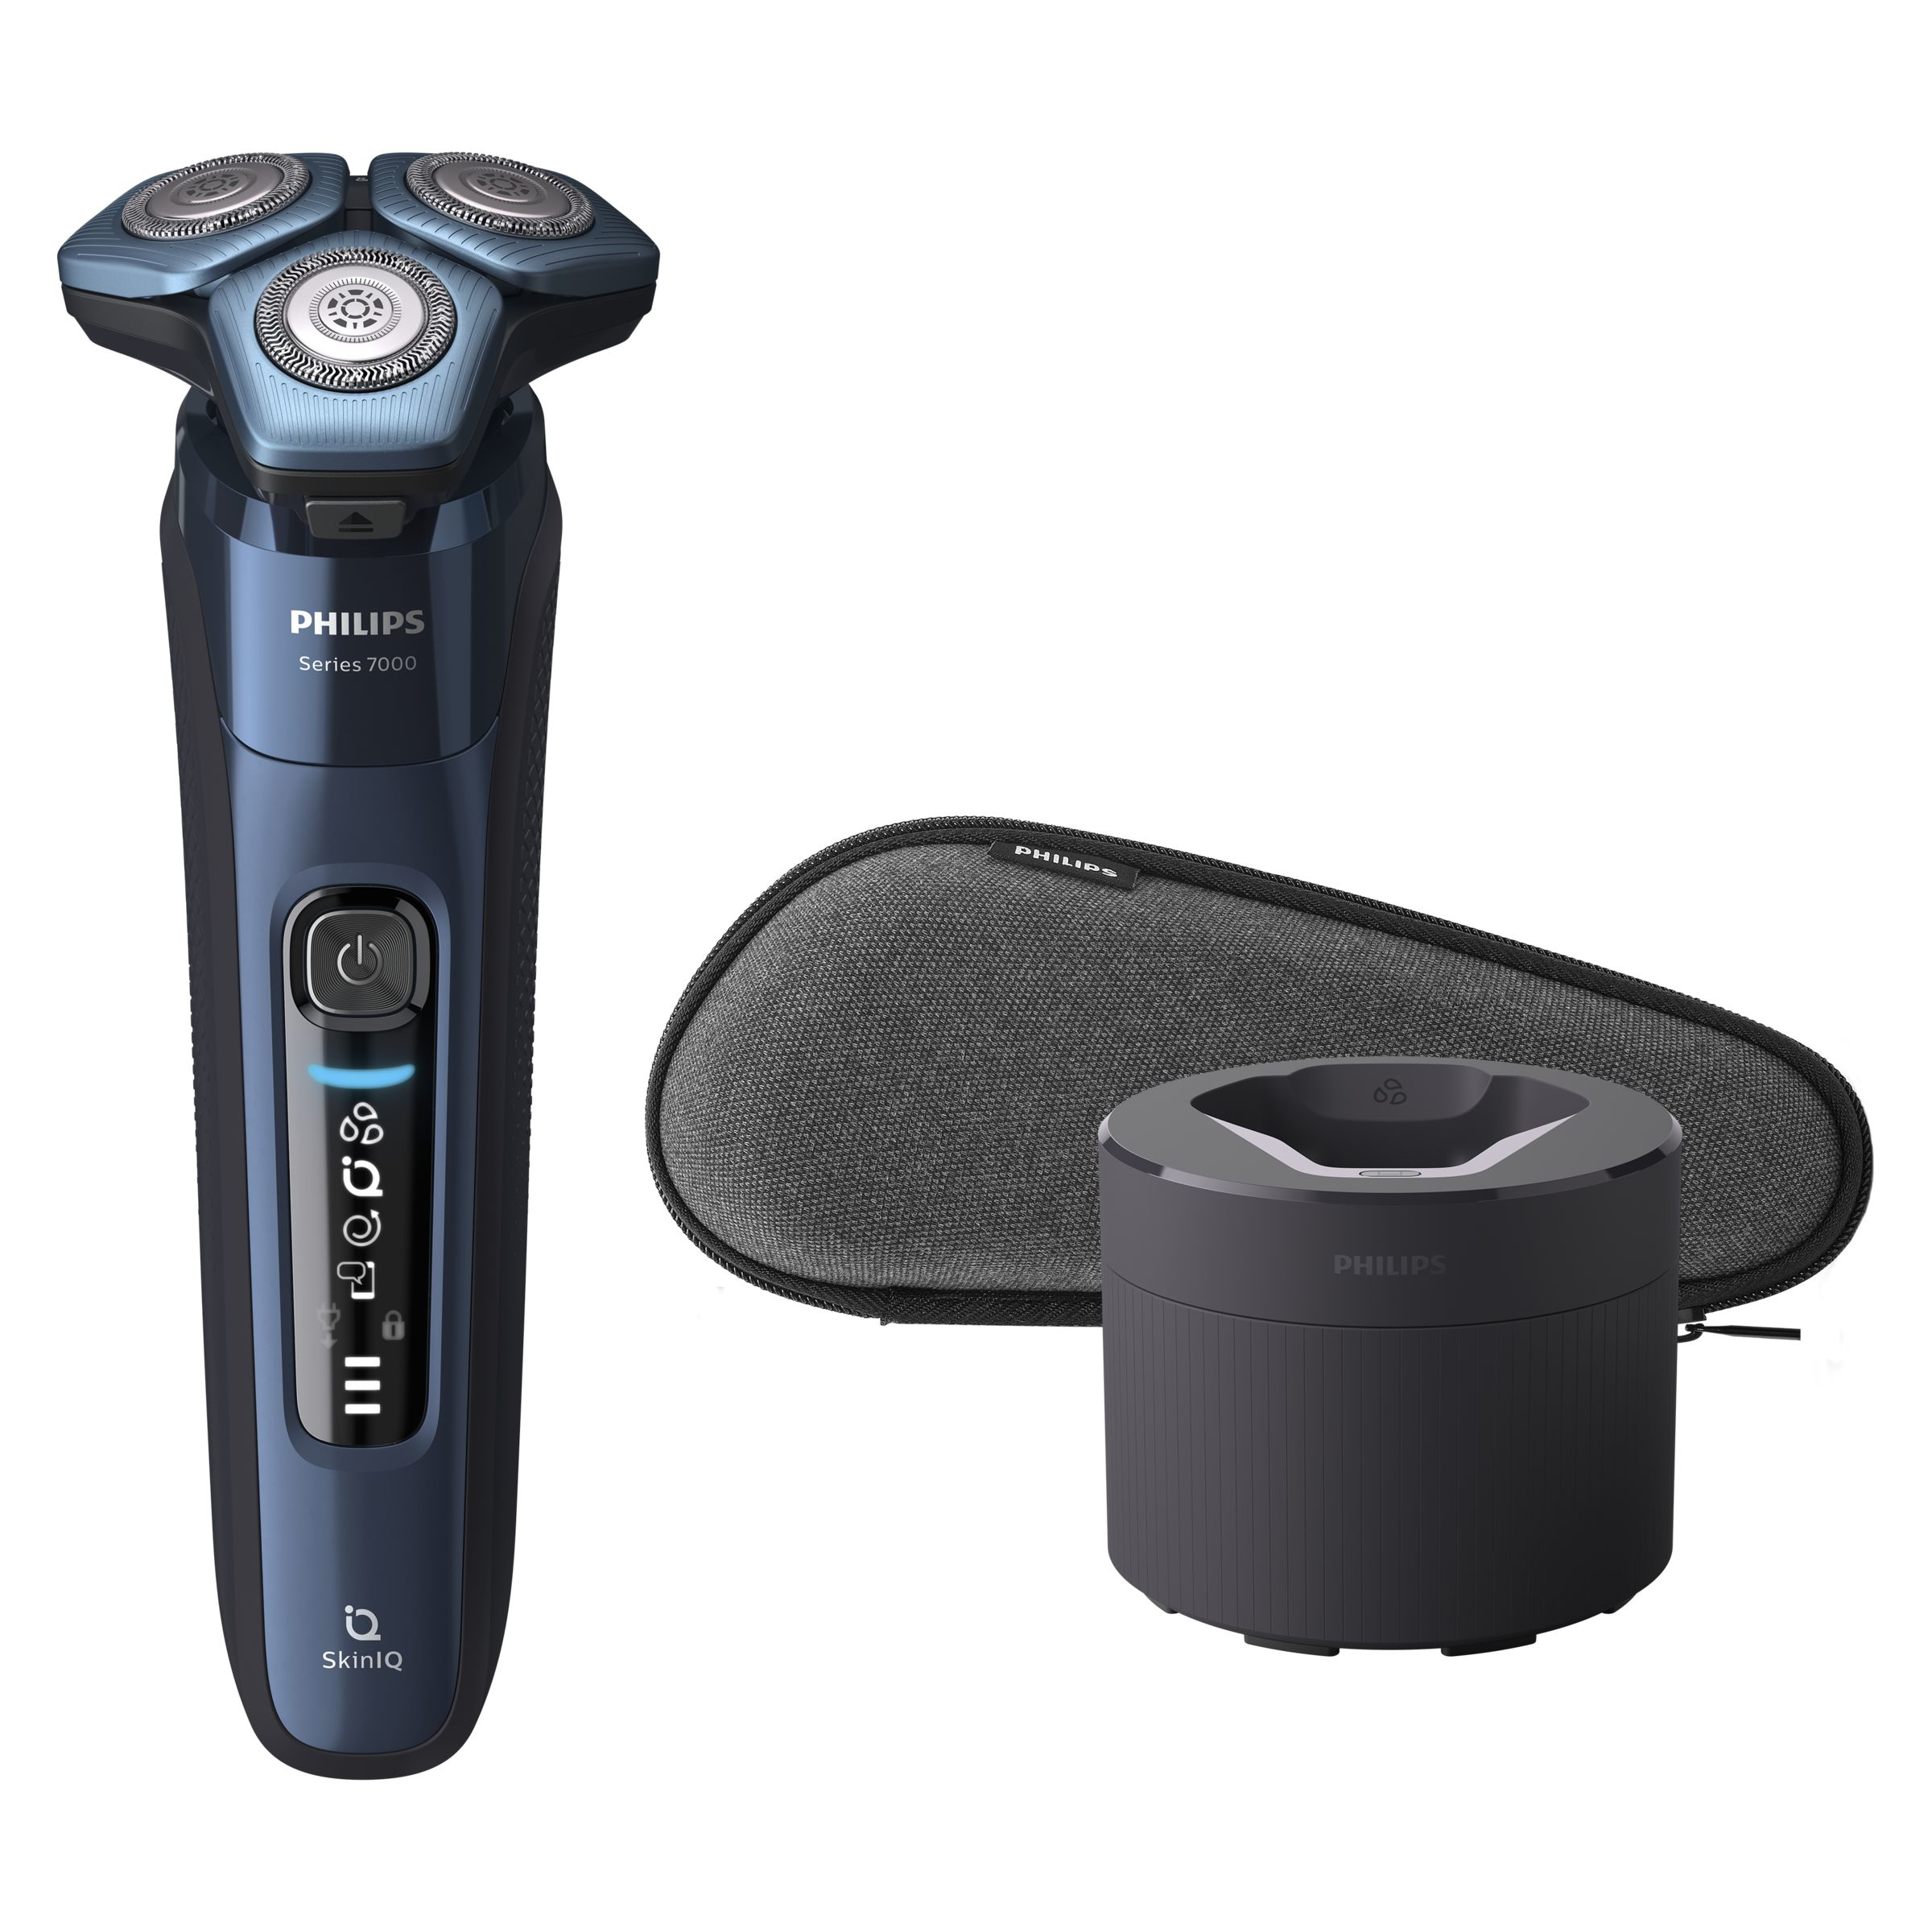 Philips SHAVER Series 7000 Wet & Dry Electric Shaver